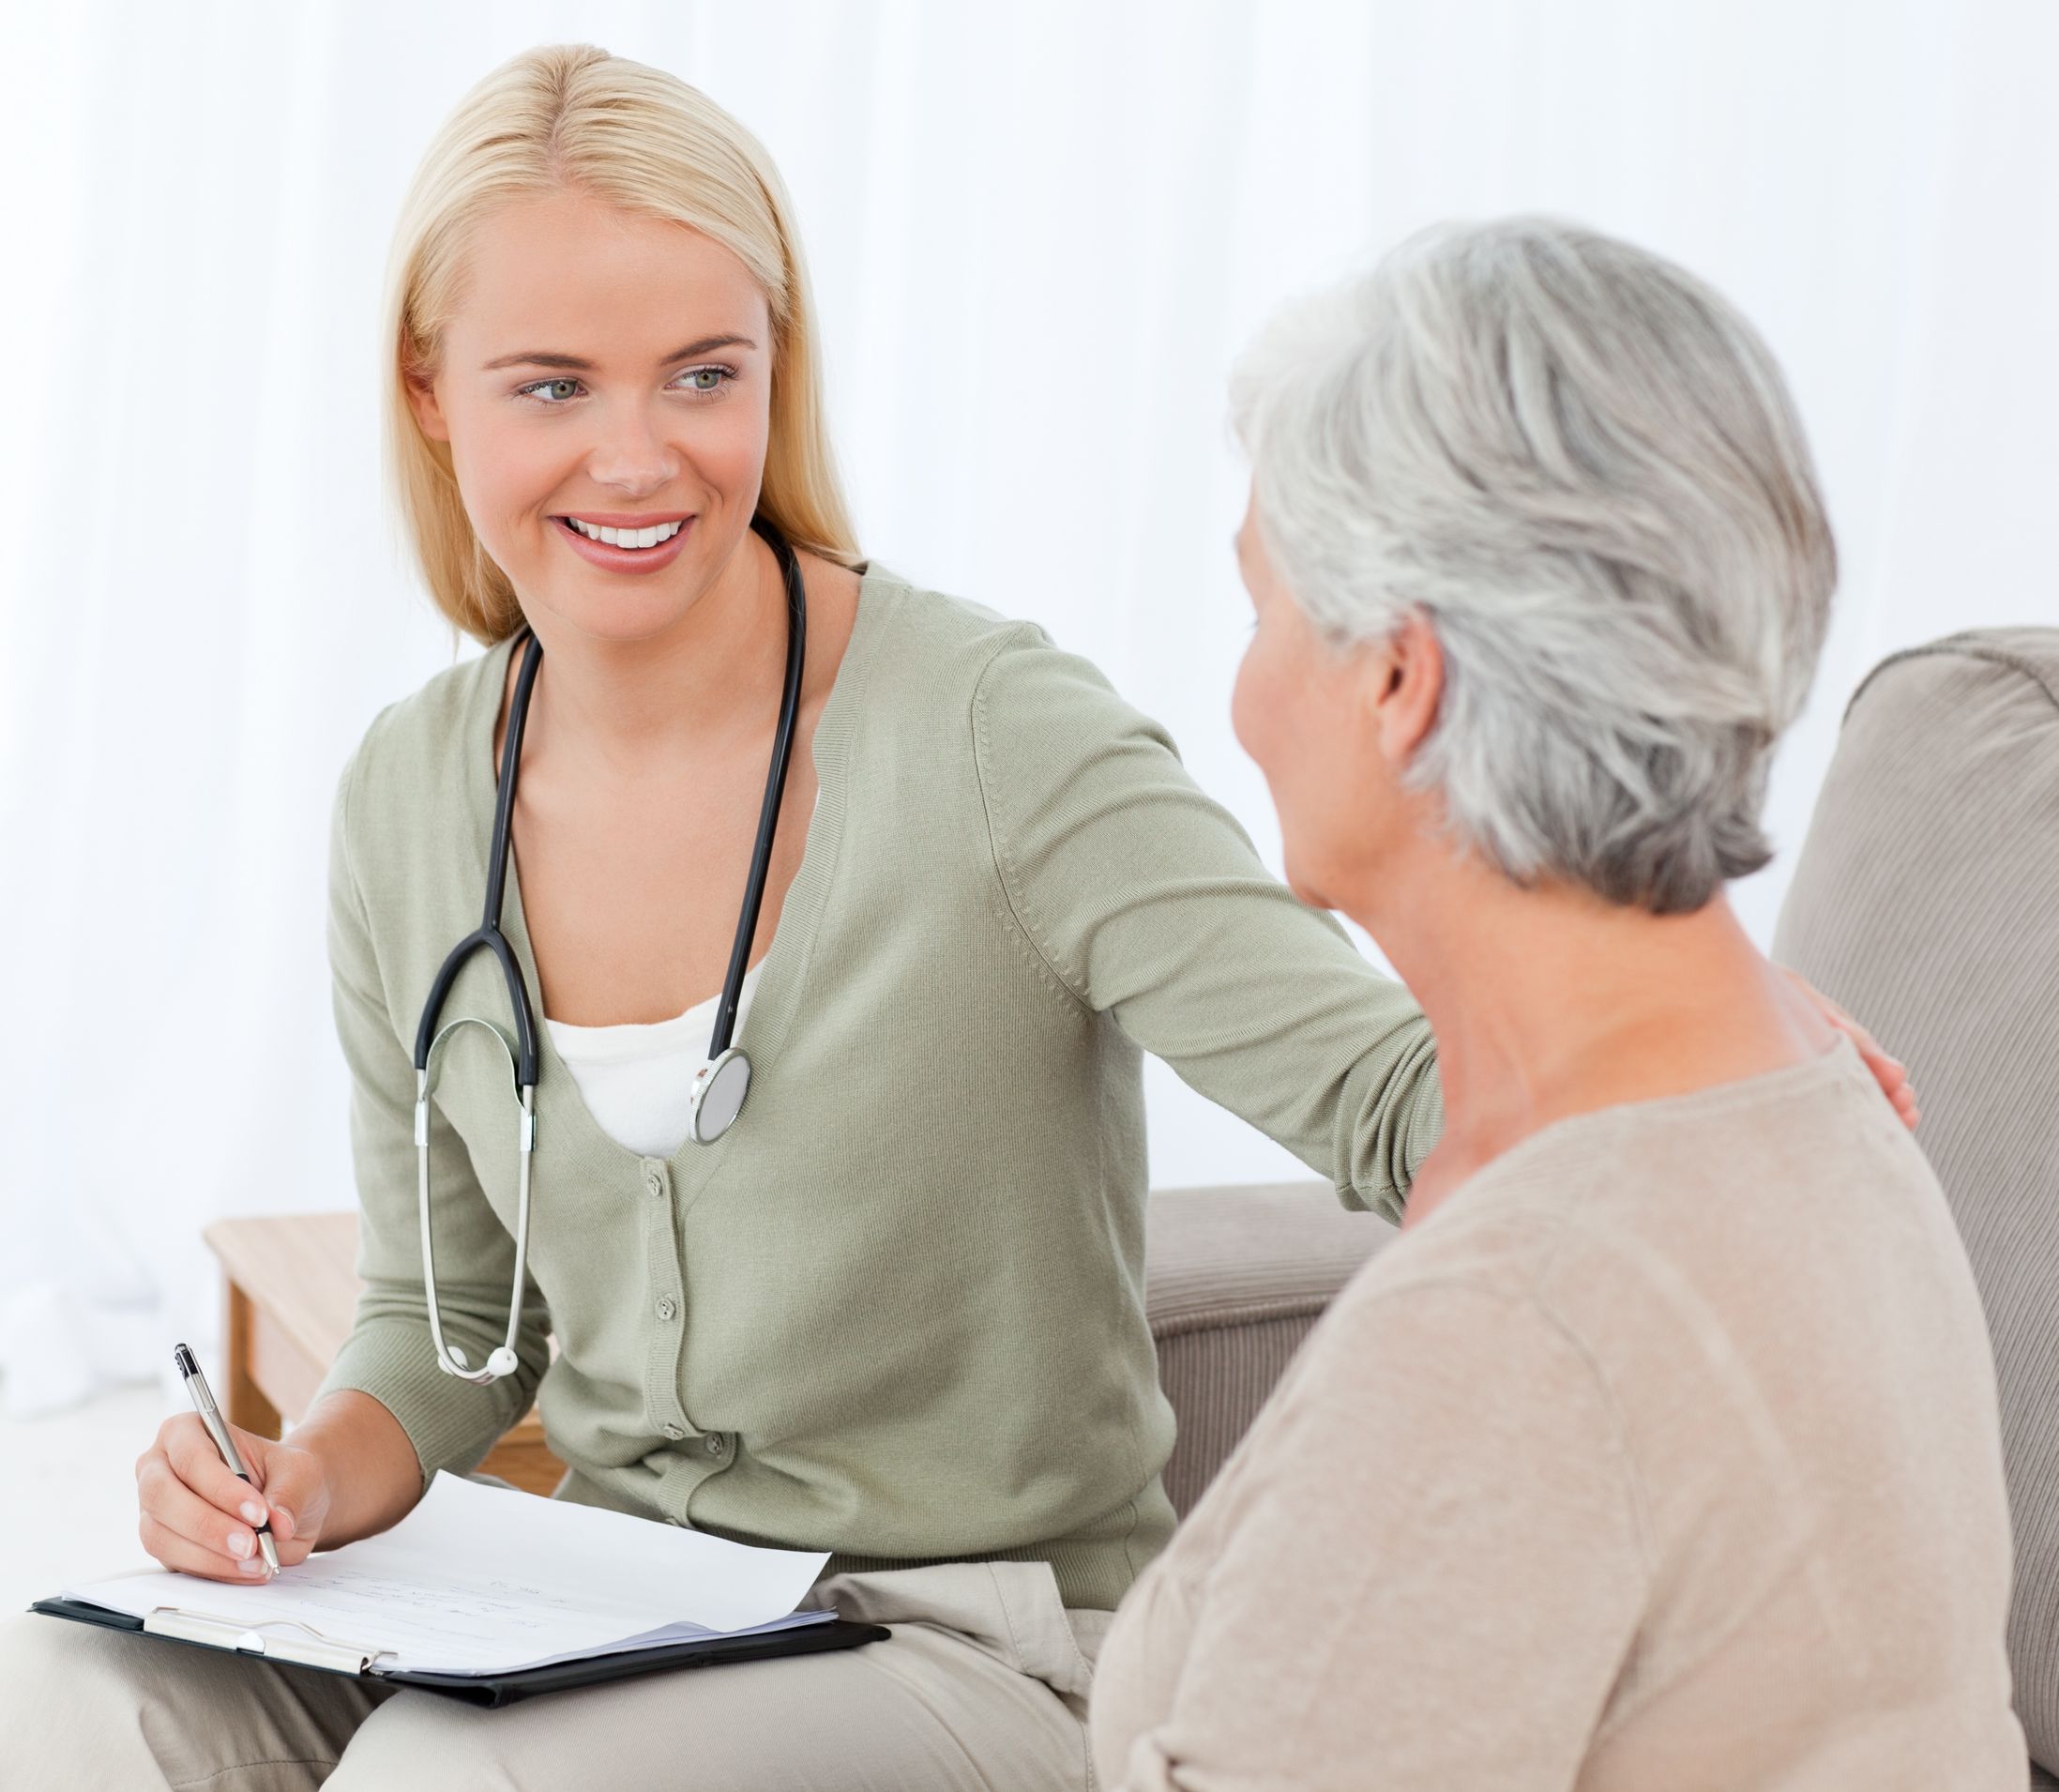 Should Home Health Care Be Part of Your Preventive Care Plan?